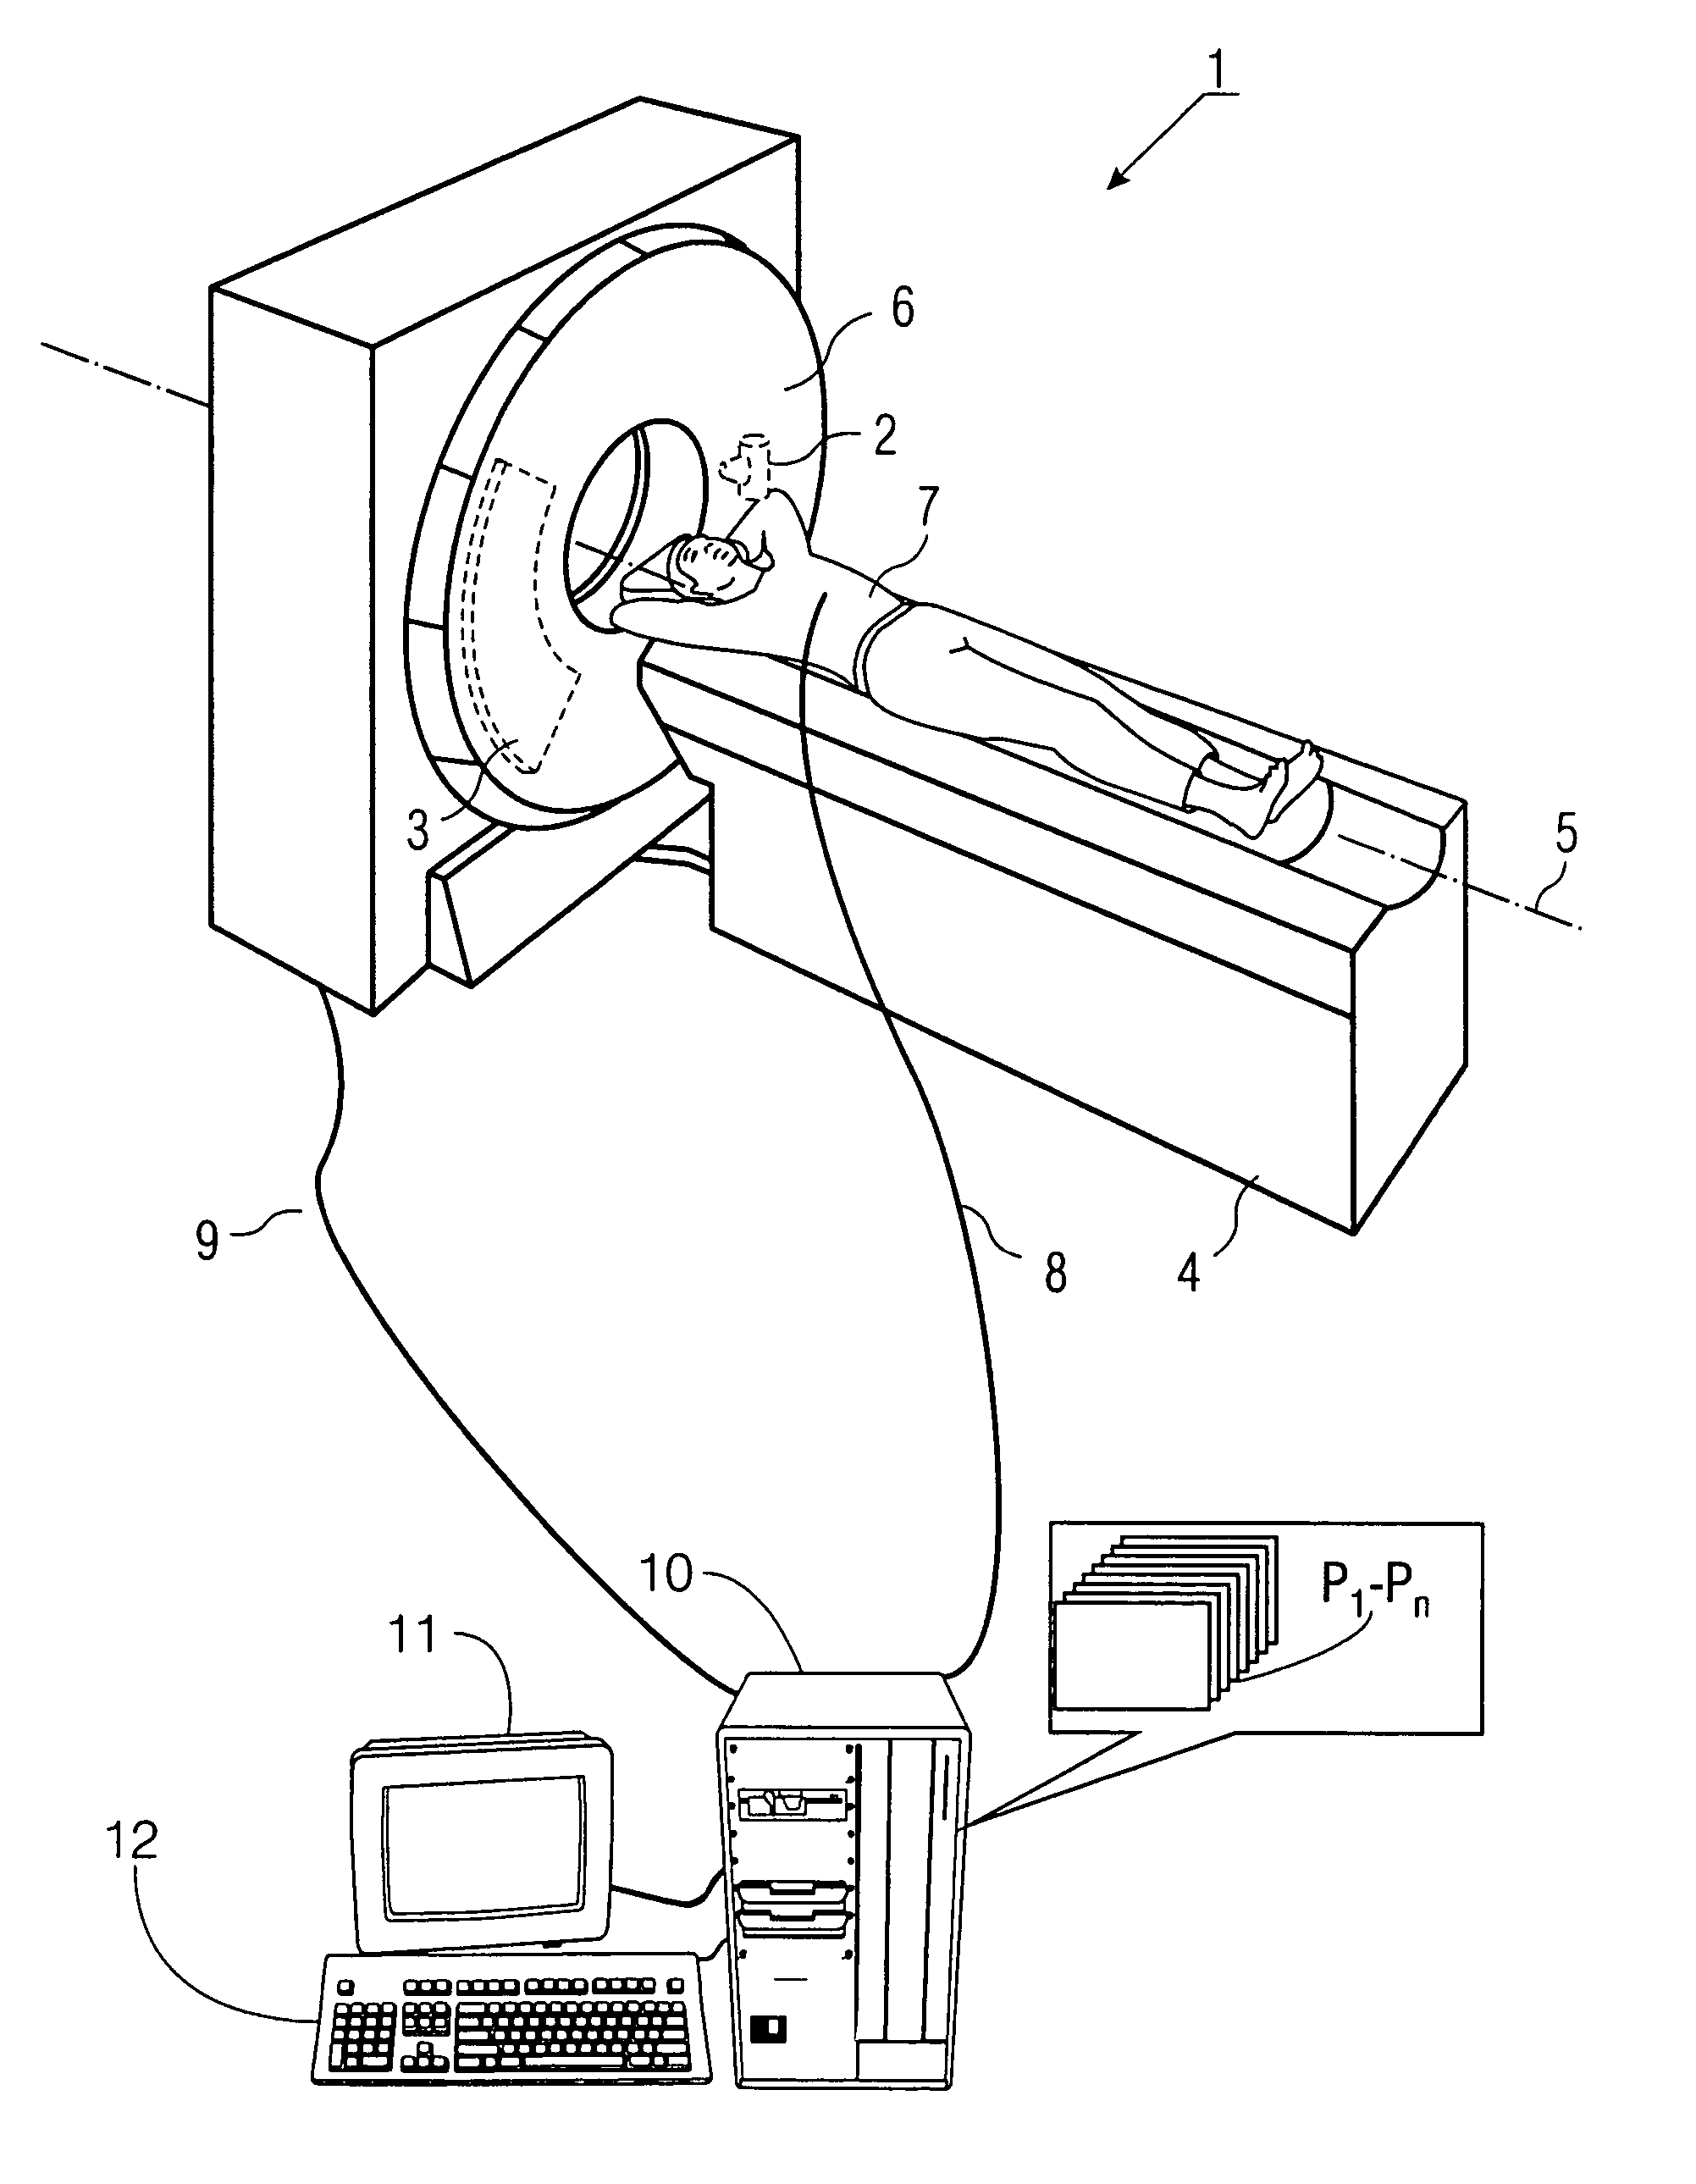 Method for producing tomograms of a periodically moving object with the aid of a focus/detector combination